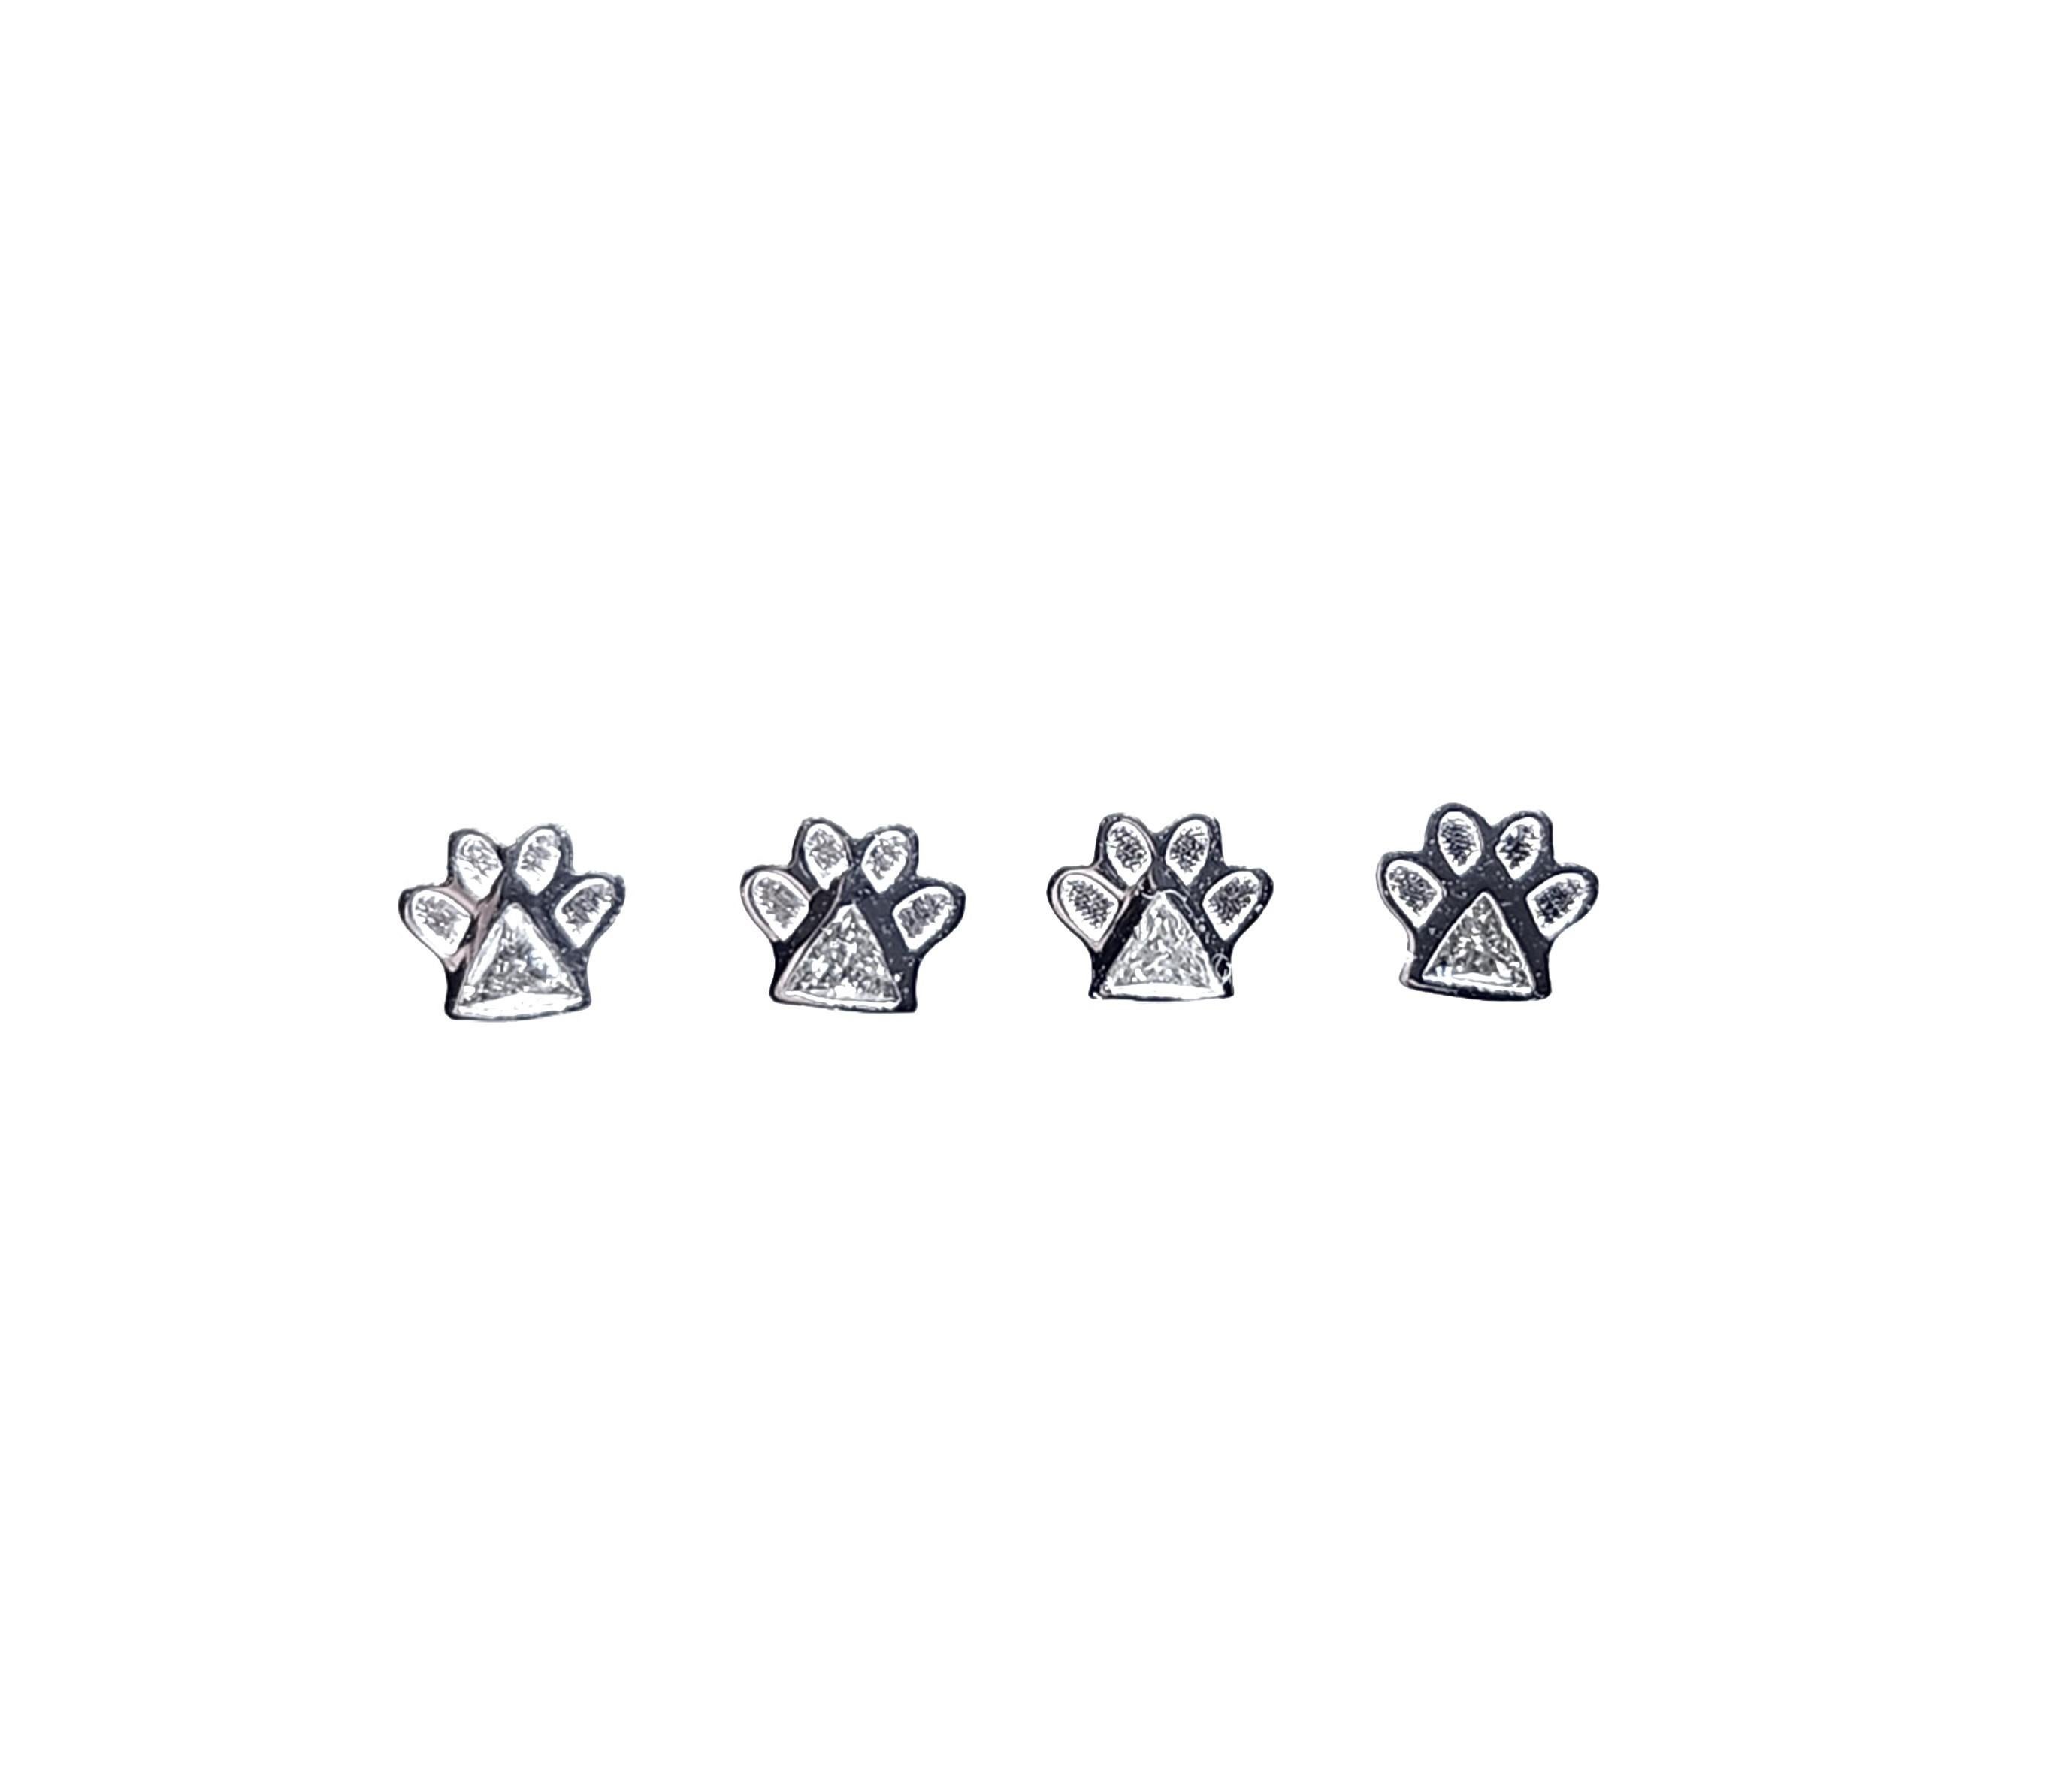 A client asked me to design a mini Paw Print stud earring with diamond so that she could wear multiples in her piercings. Perhaps the smallest size earring I have is the Baby Gingko which also can be worn in multiples.
I selected a Trilliant Diamond